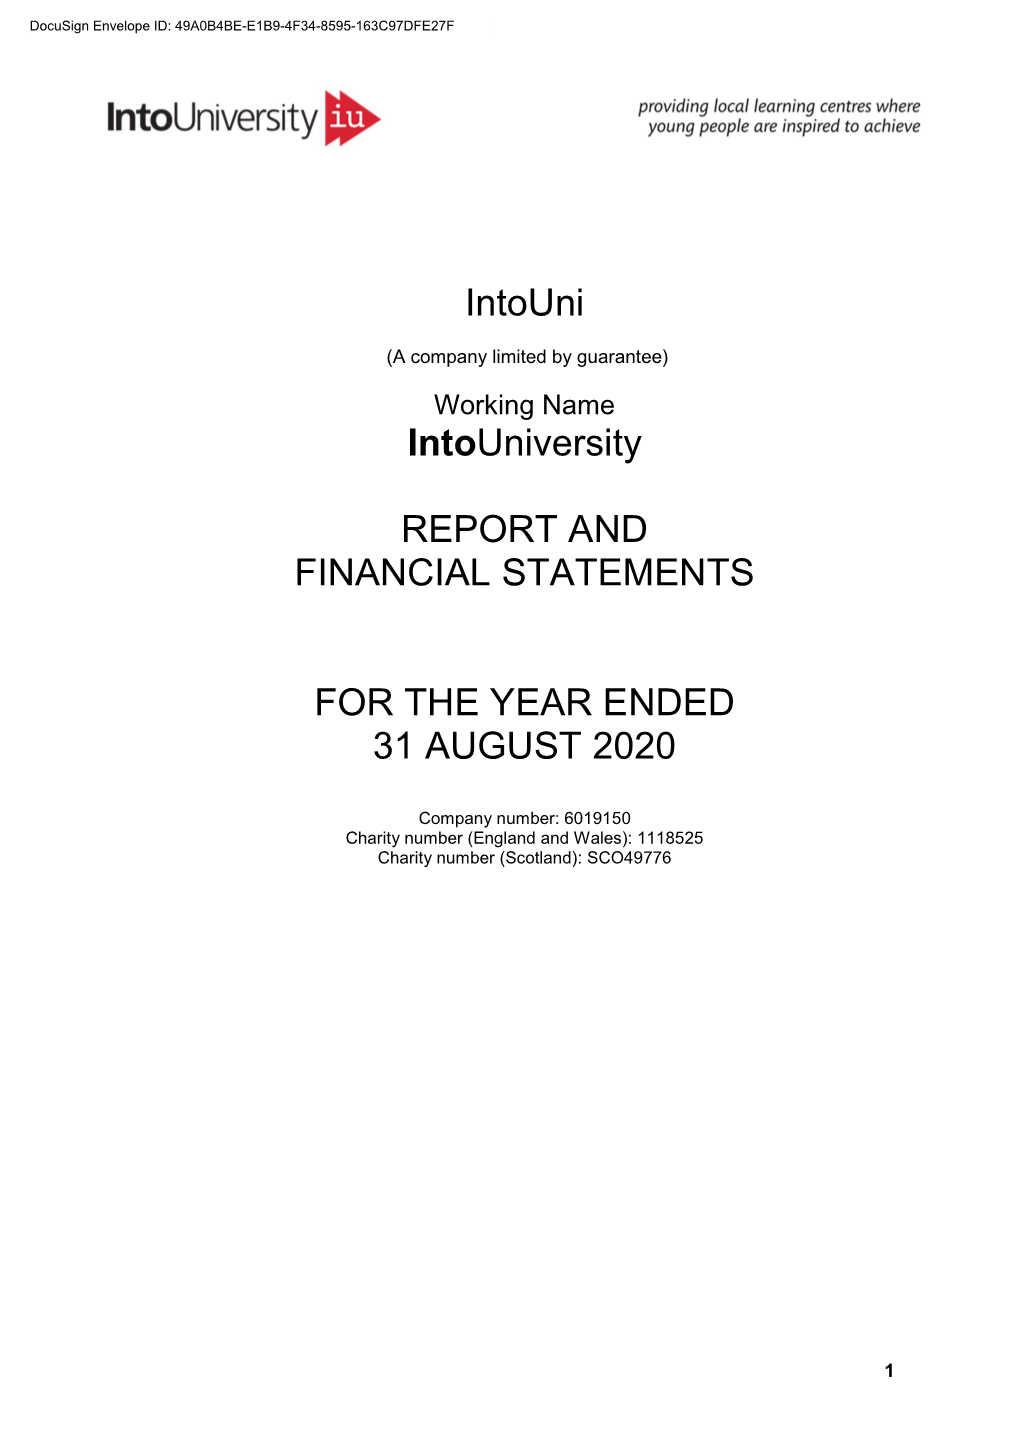 Intouni Intouniversity REPORT and FINANCIAL STATEMENTS FOR